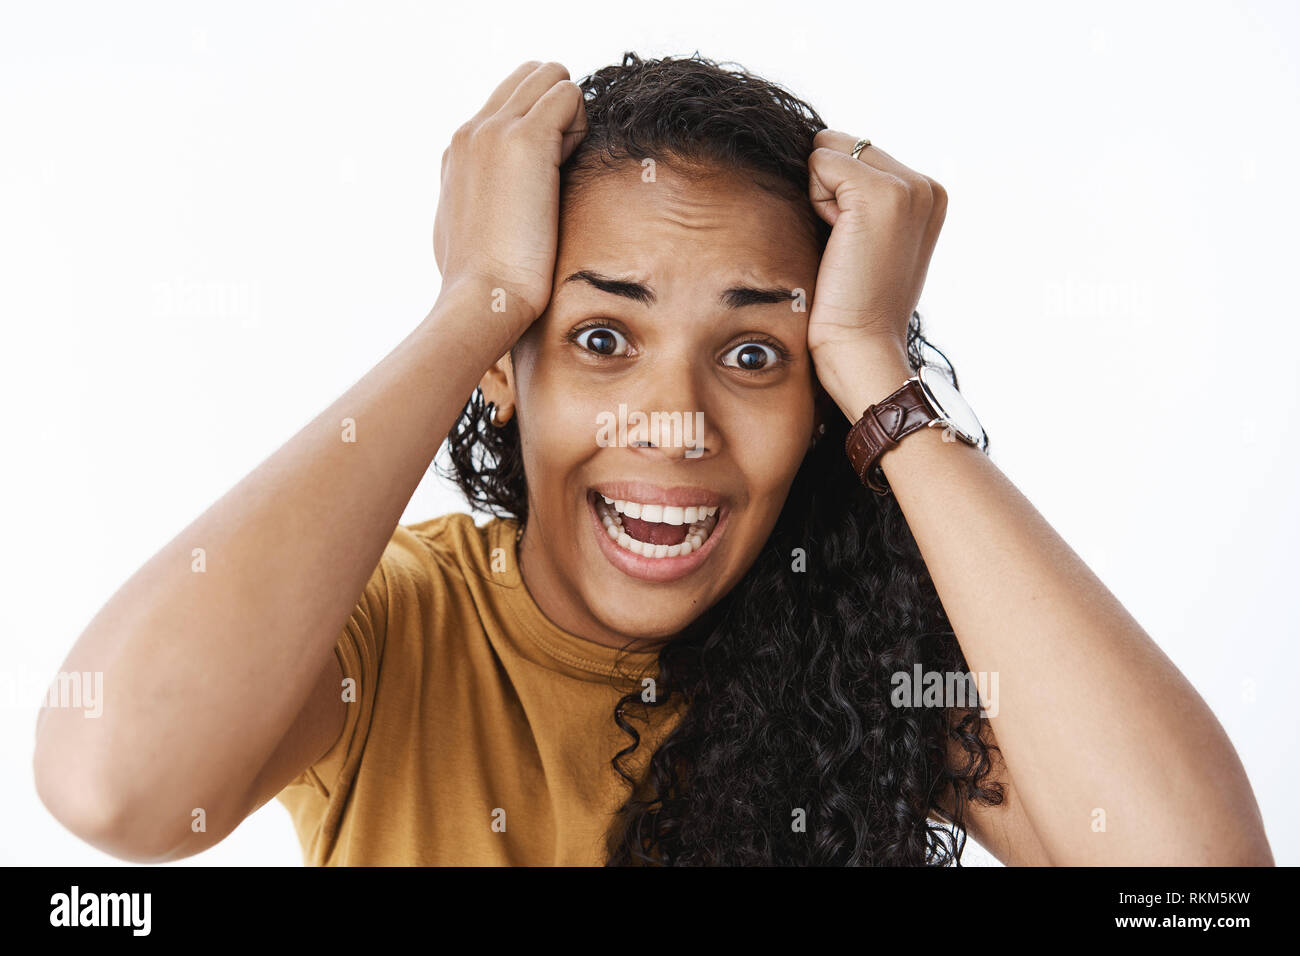 Panicking freaked out african american woman wearing watch and t-shirt screaming shocked and scared holding hands on head popping eyes at camera Stock Photo